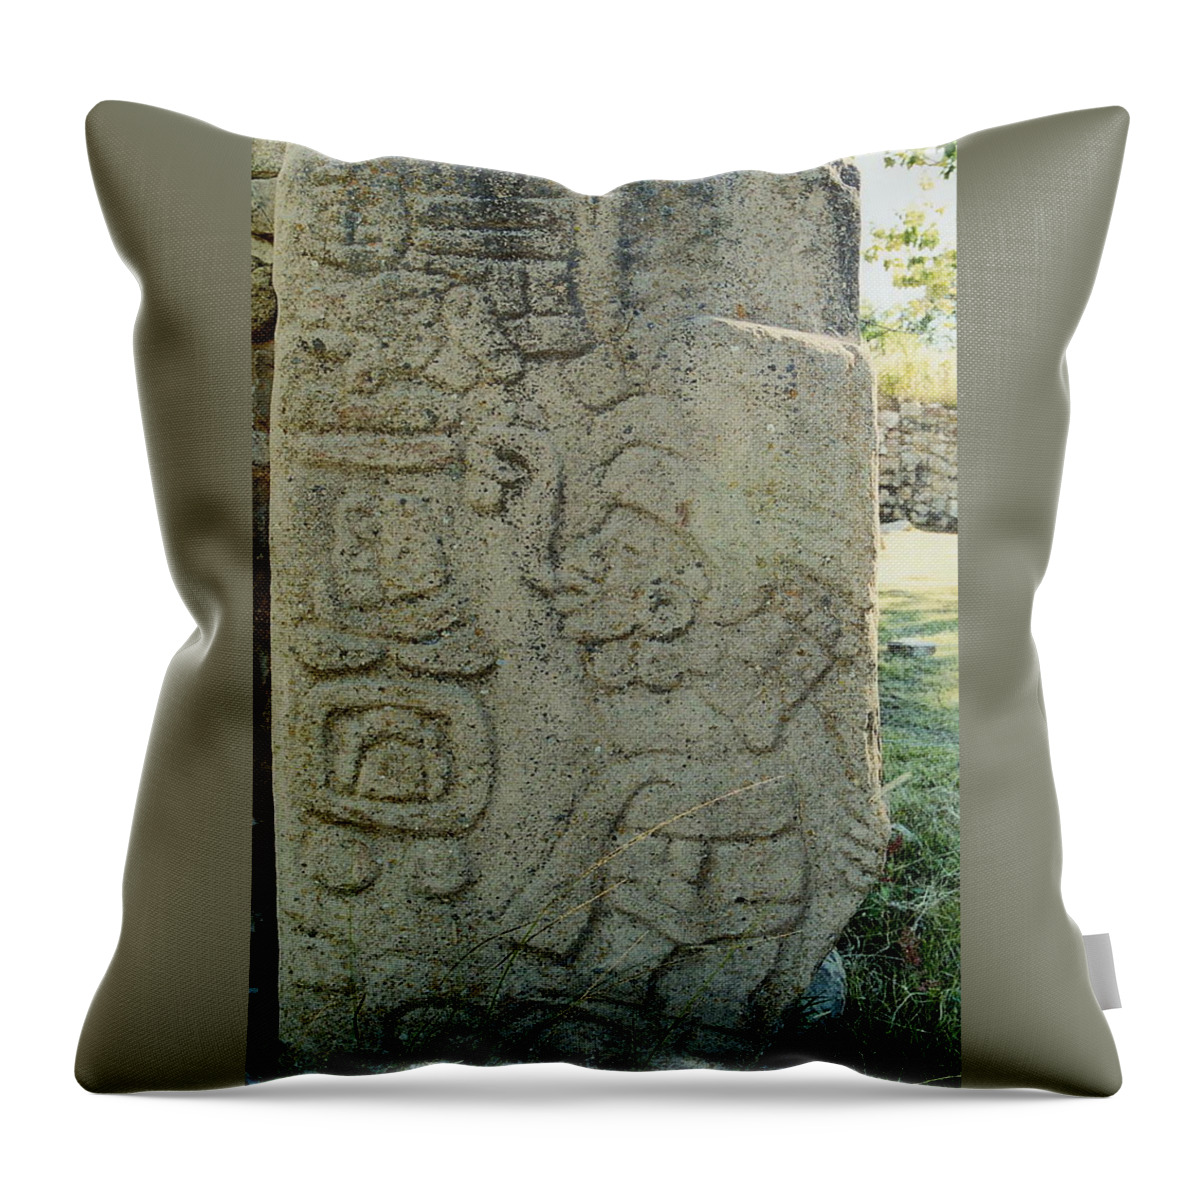 Danzantes Throw Pillow featuring the photograph Carved Danzantes Stone by Michael Peychich